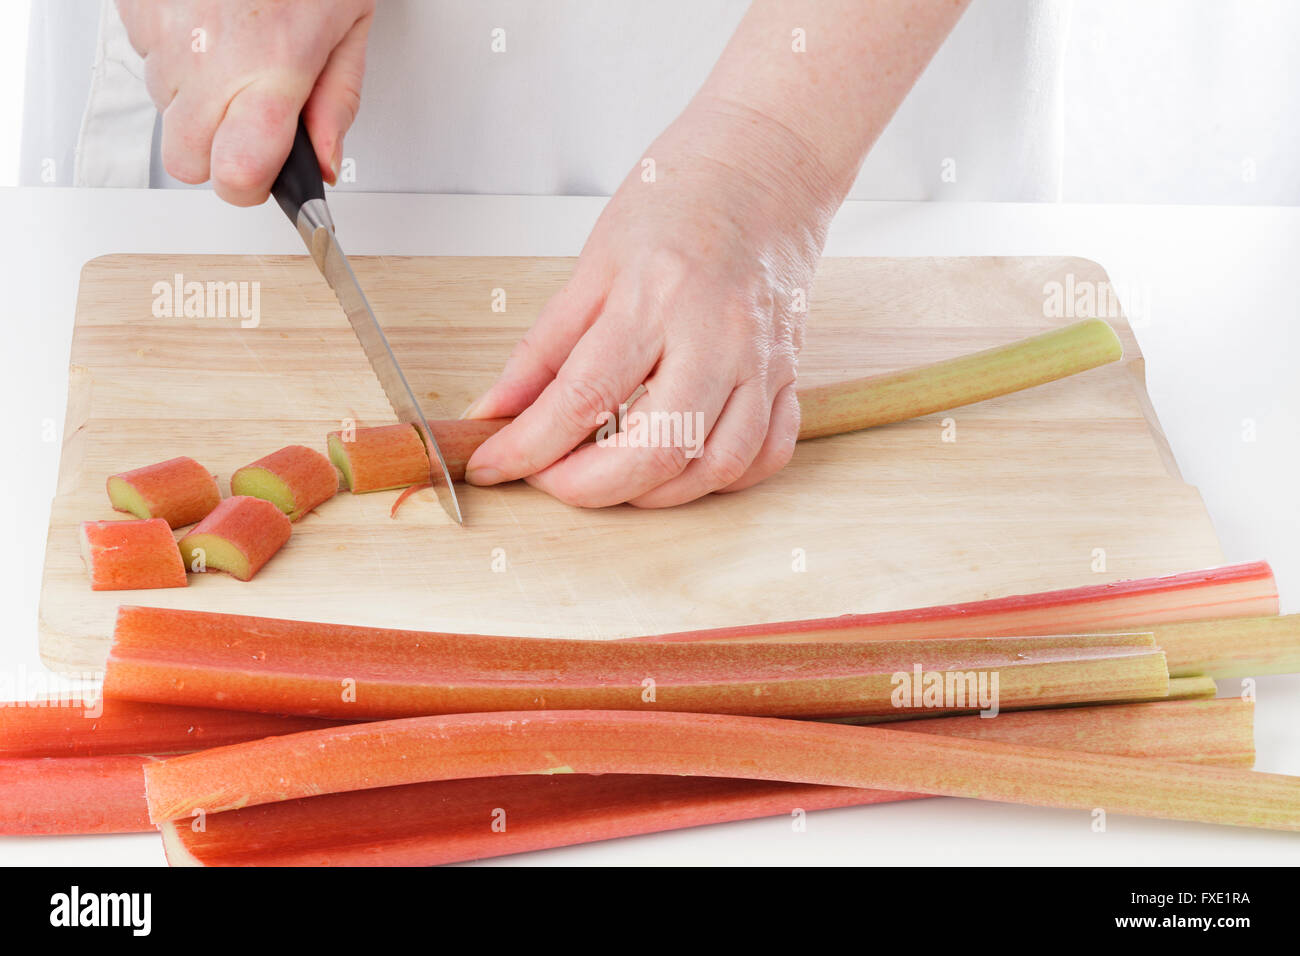 Hands cutting rhubarb in the kitchen Stock Photo